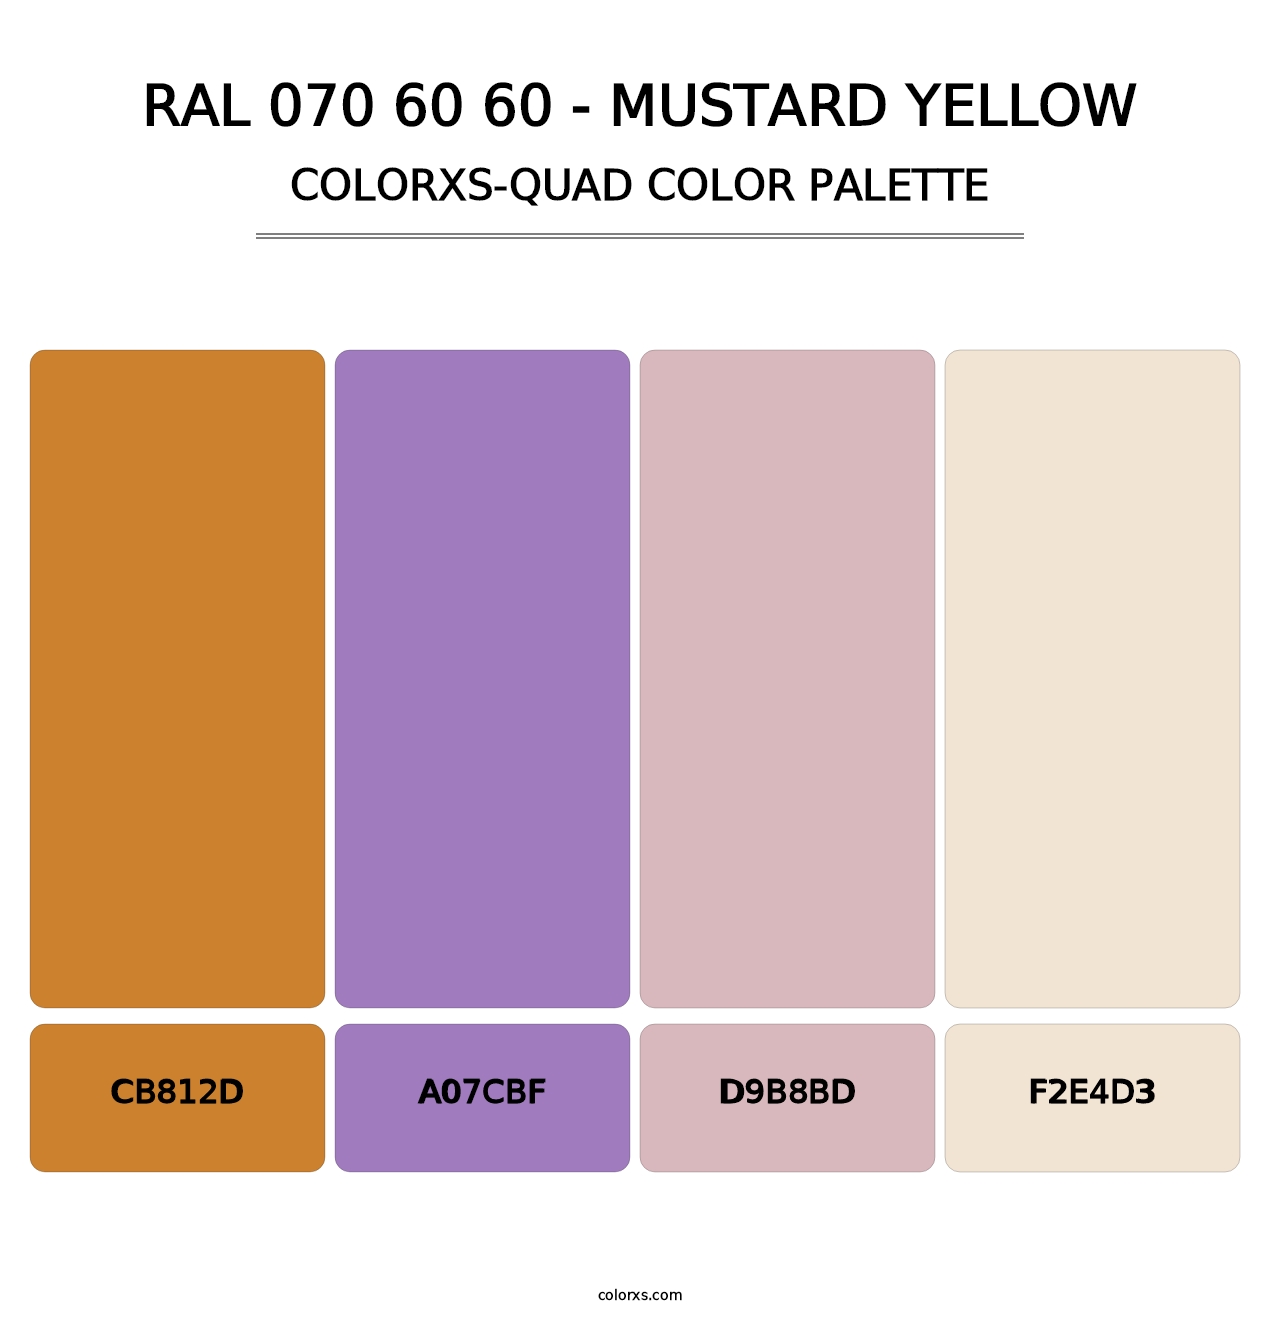 RAL 070 60 60 - Mustard Yellow - Colorxs Quad Palette